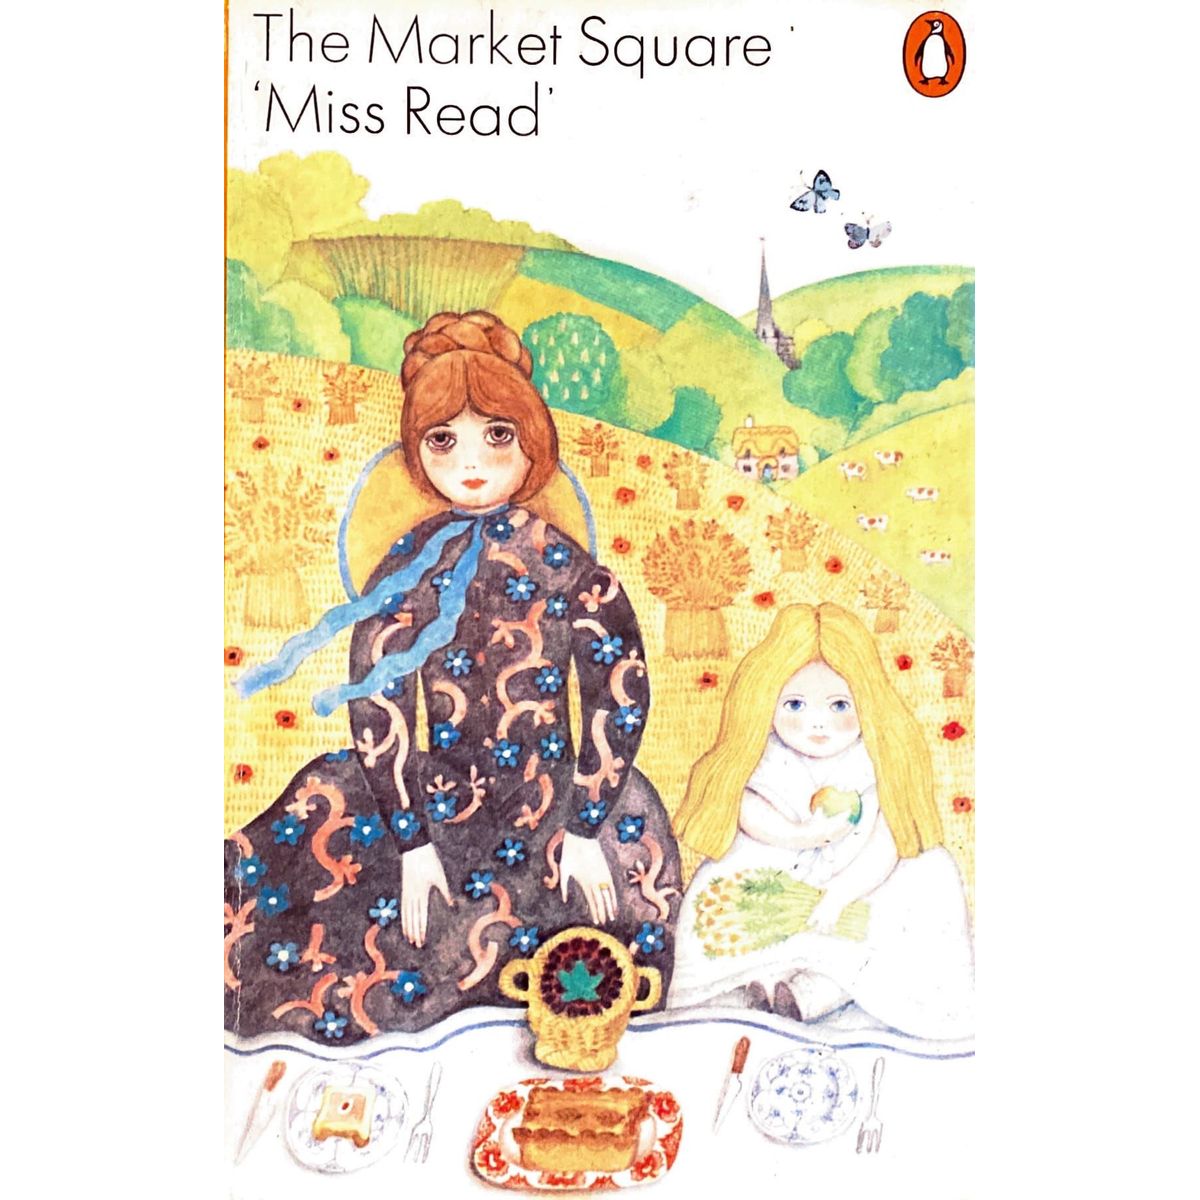 ISBN: 9780140030075 / 0140030077 - The Market Square by Miss Read [1976]